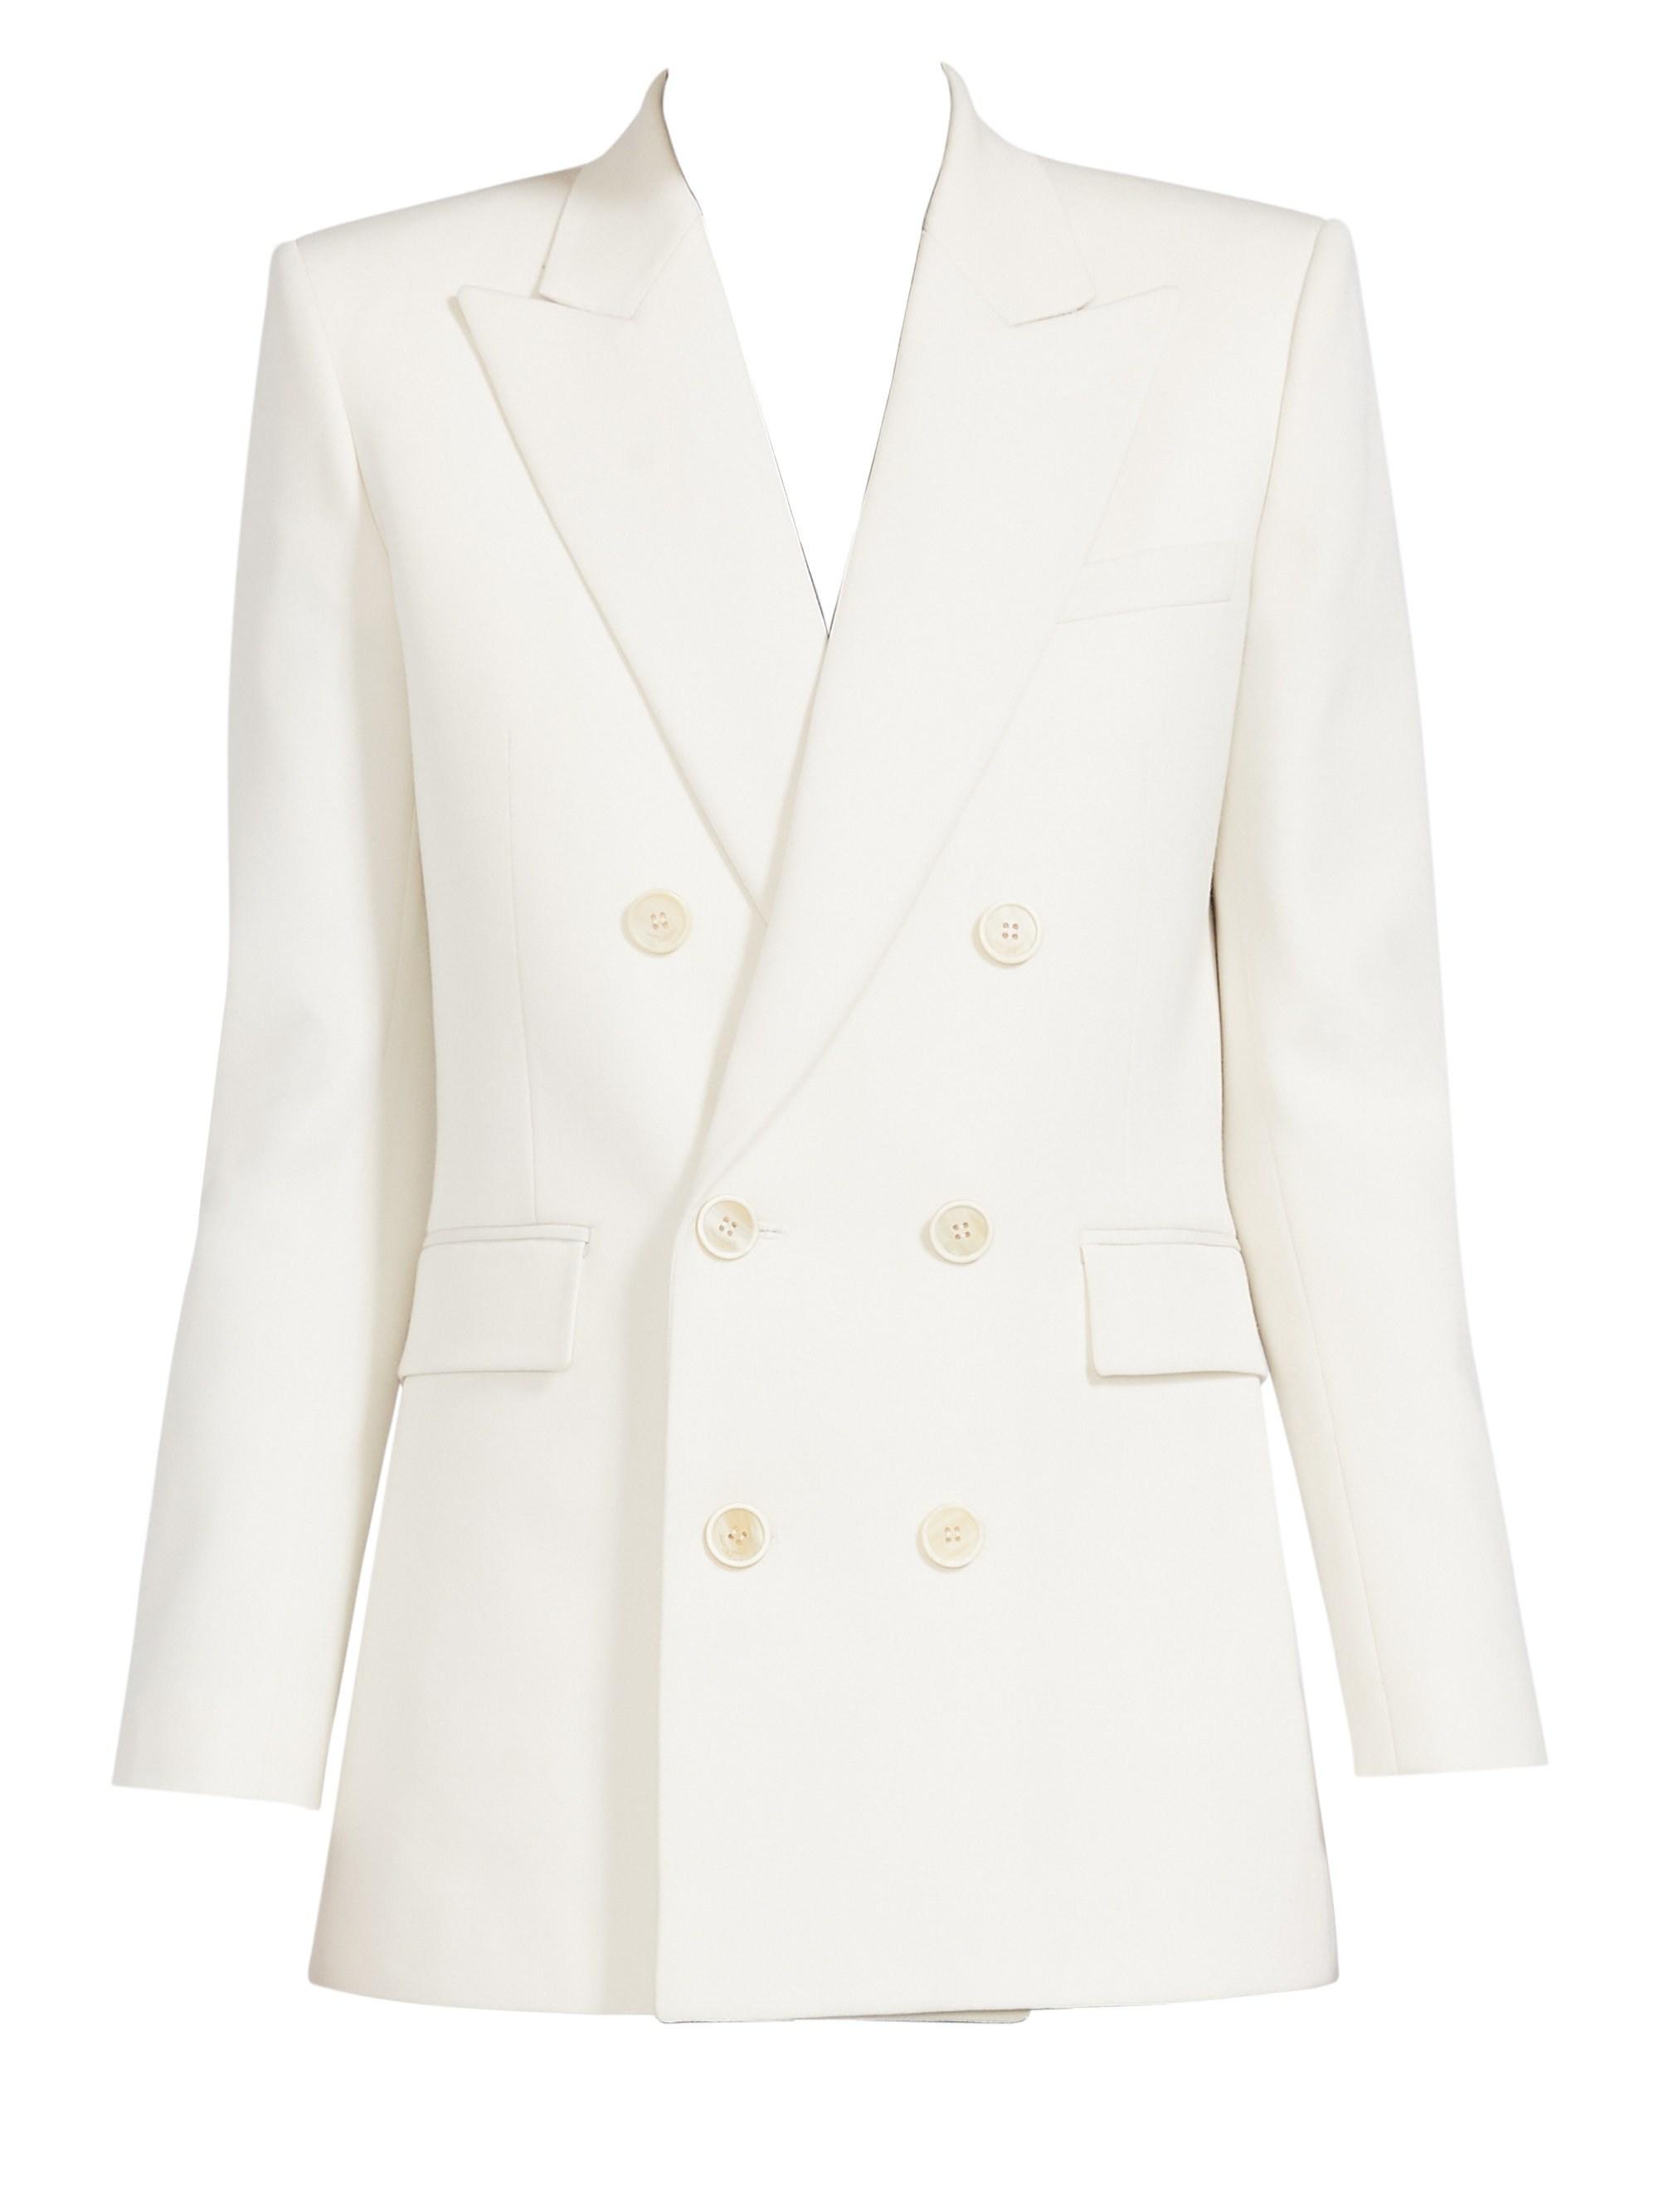 Saint Laurent Double-breasted Wool Blazer in White - Lyst